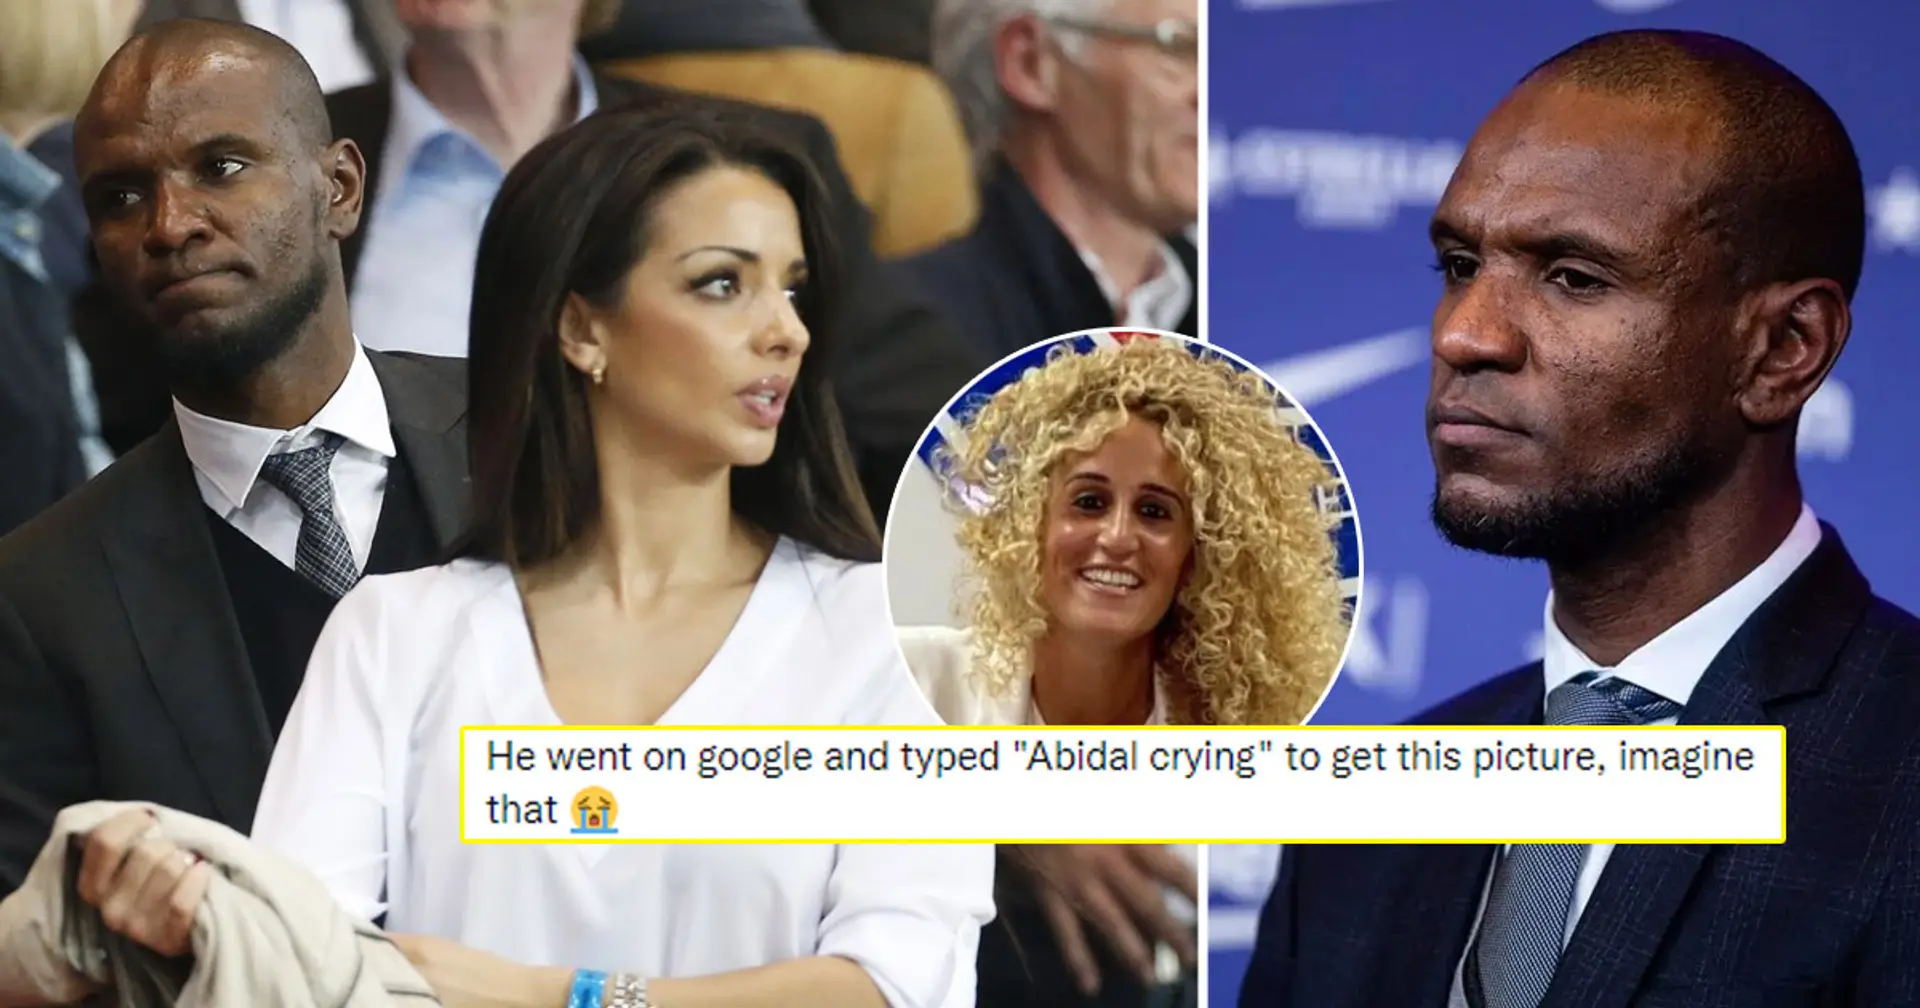 'Just a minor cheating': 9 best reactions to Abidal cheating drama